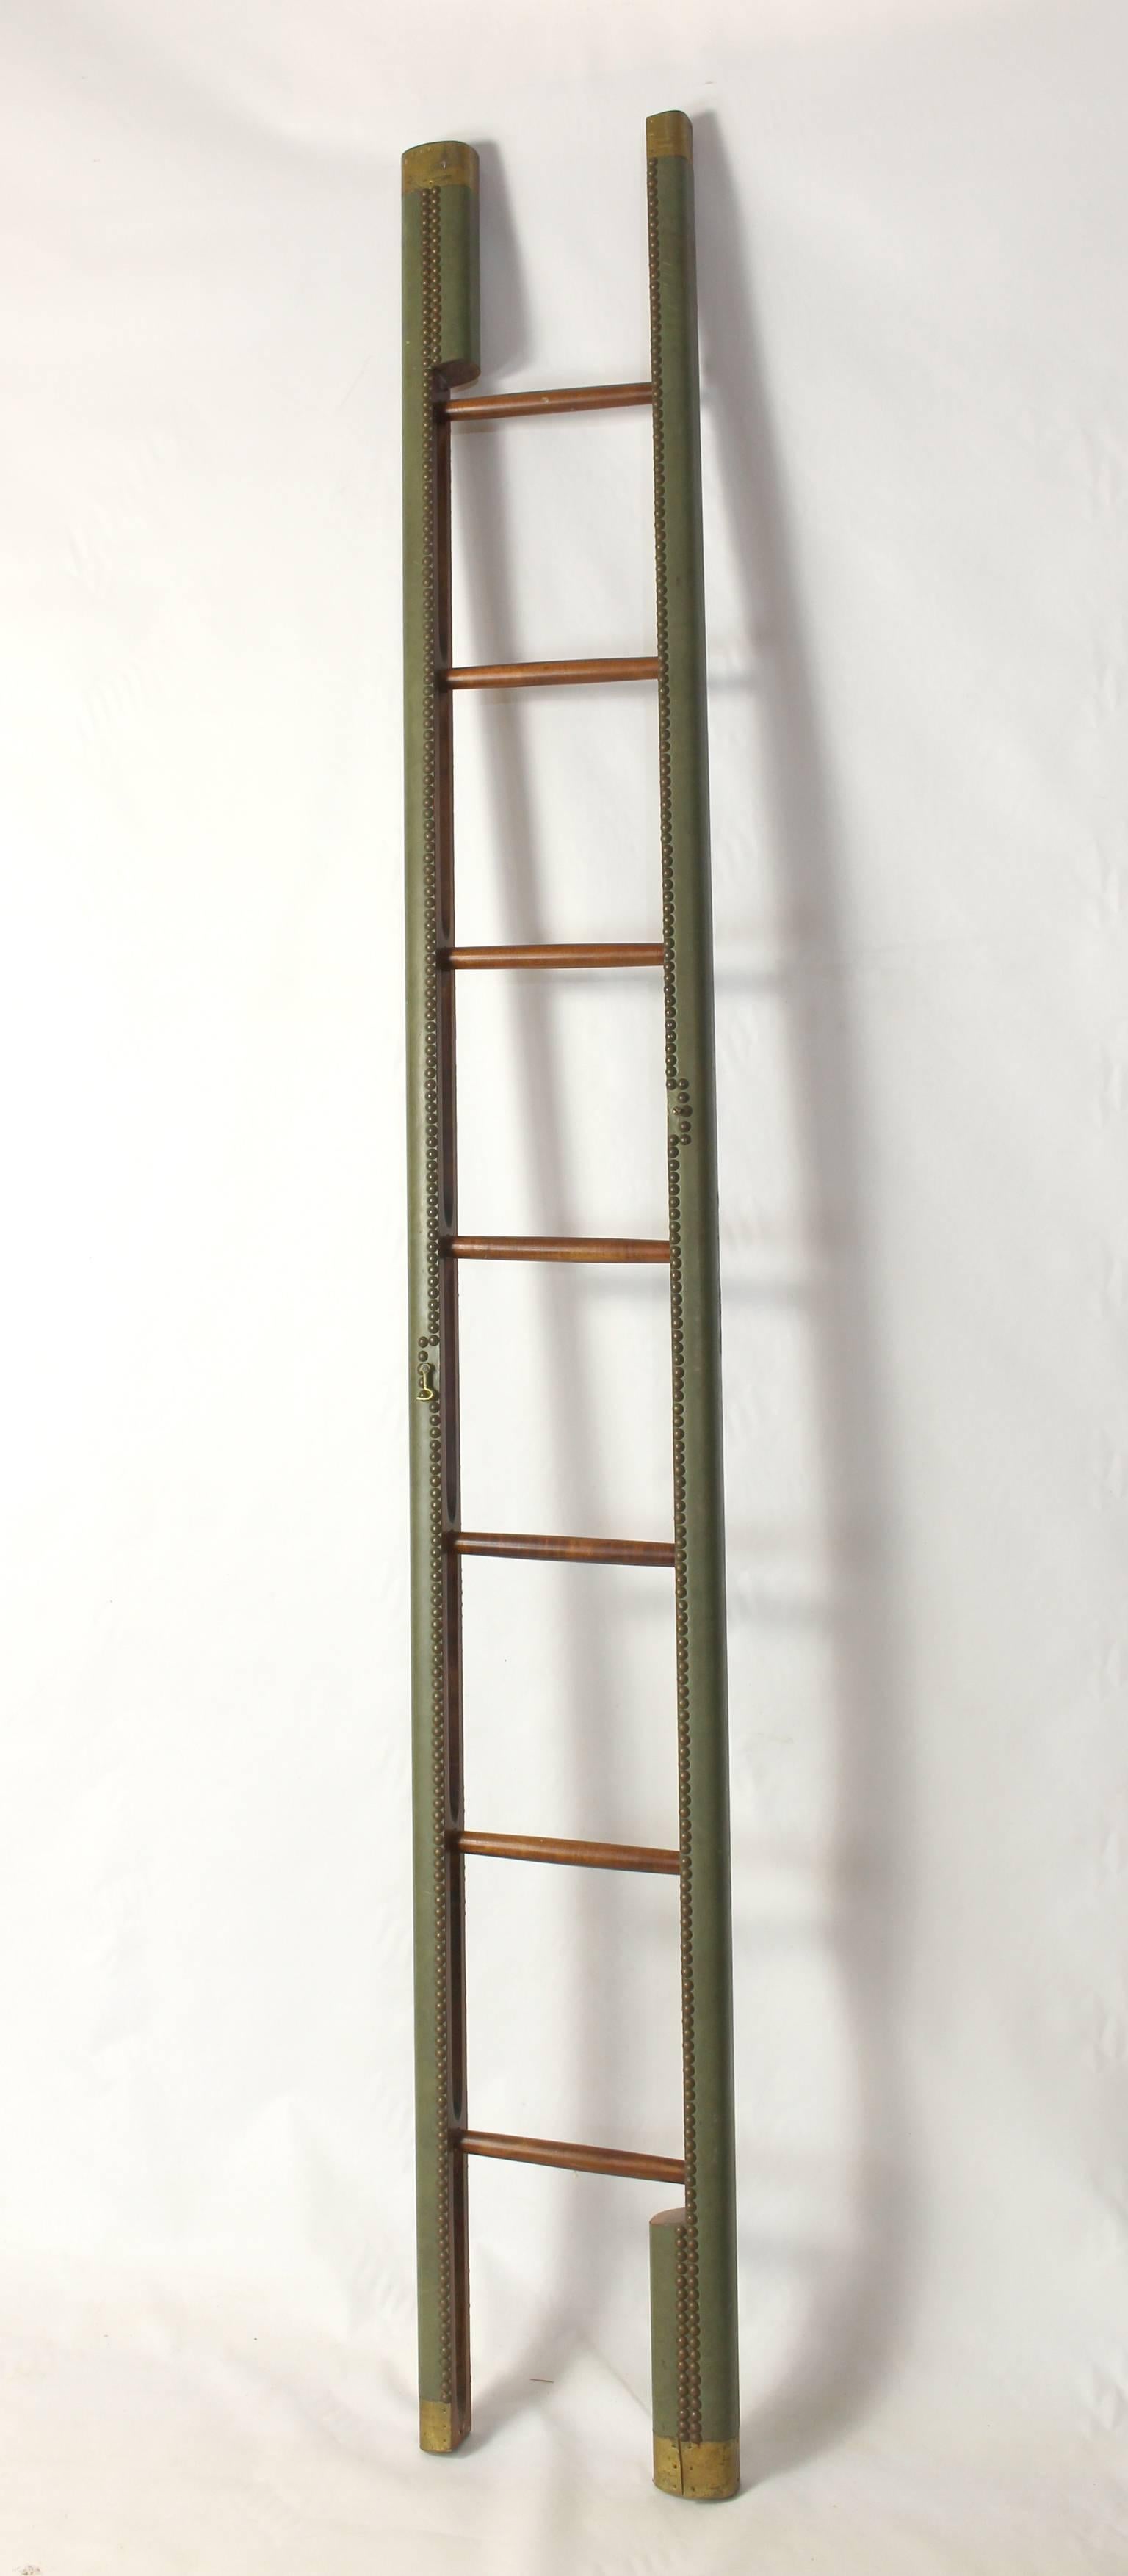 A Classic English folding pole or library ladder covered in a soft moss green leather accented with brass tacks.